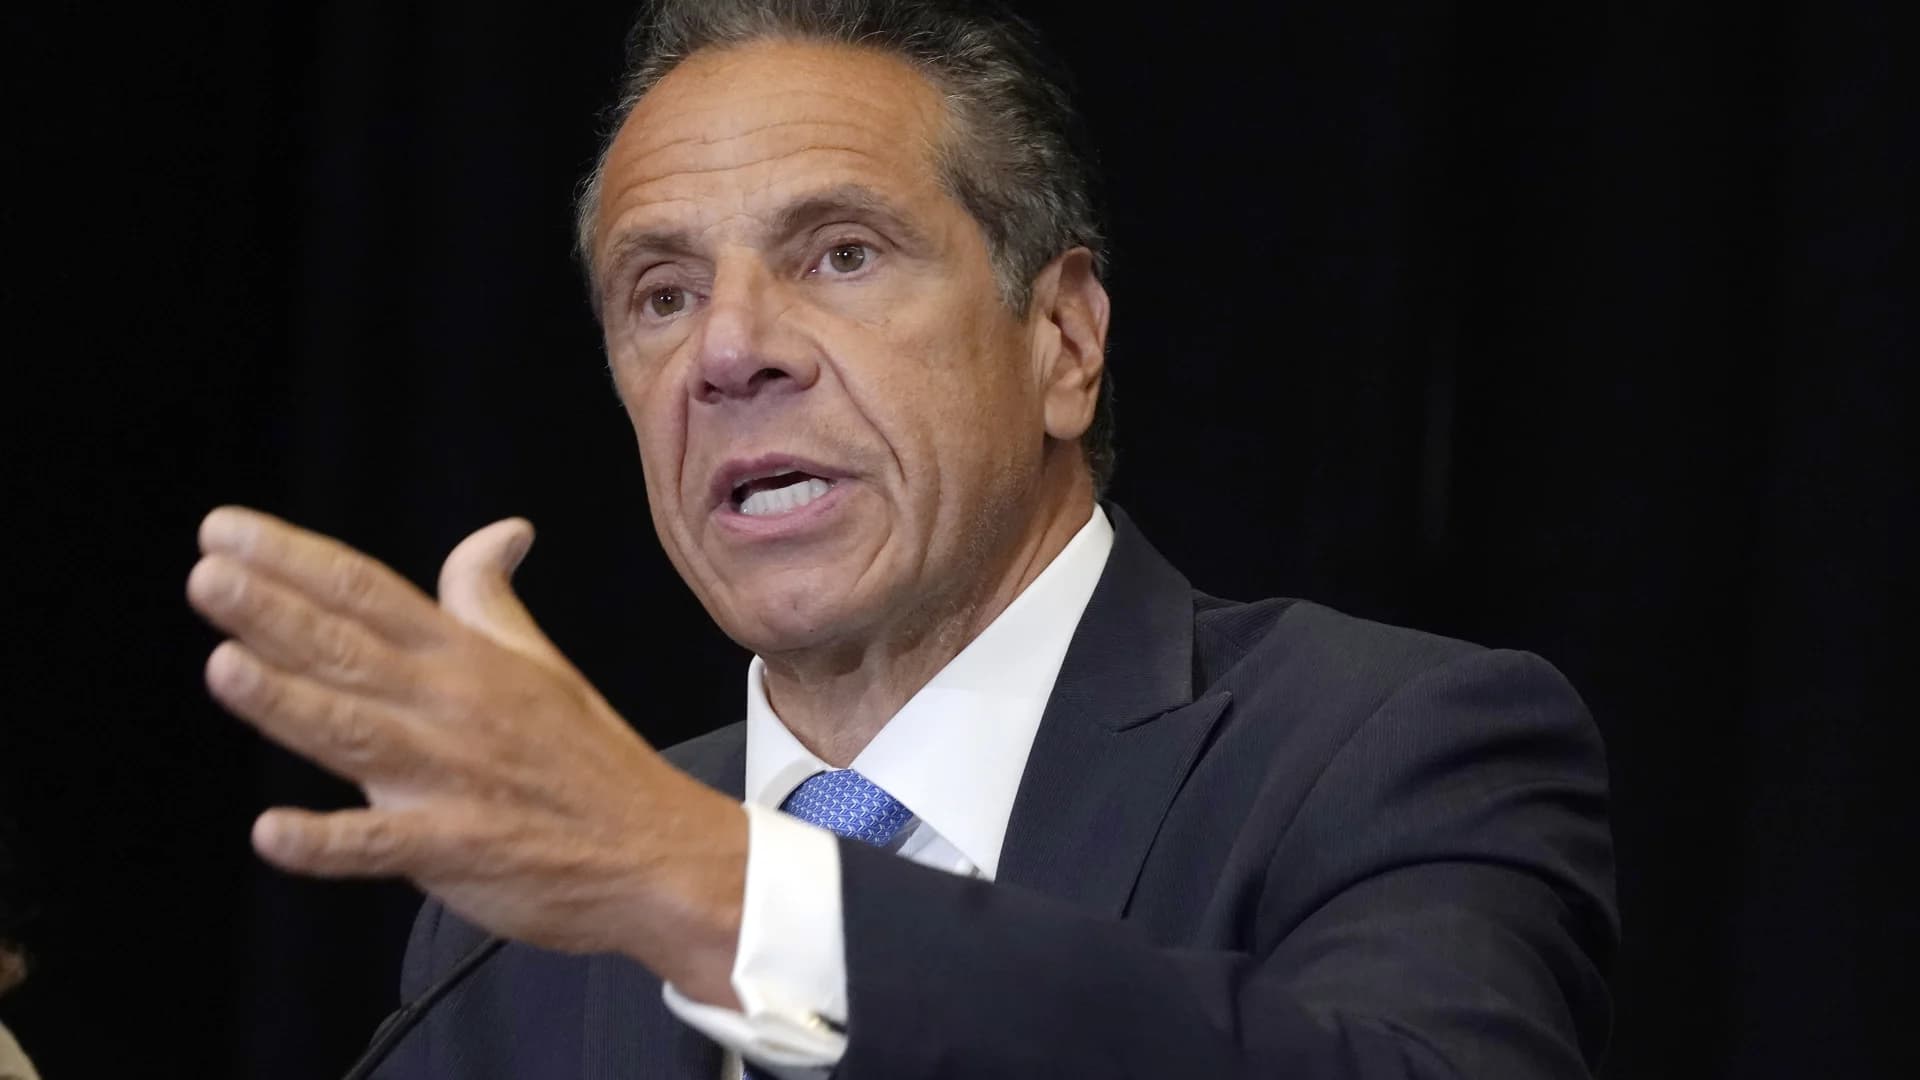 NY ethics commission rescinds approval for Cuomo book deal